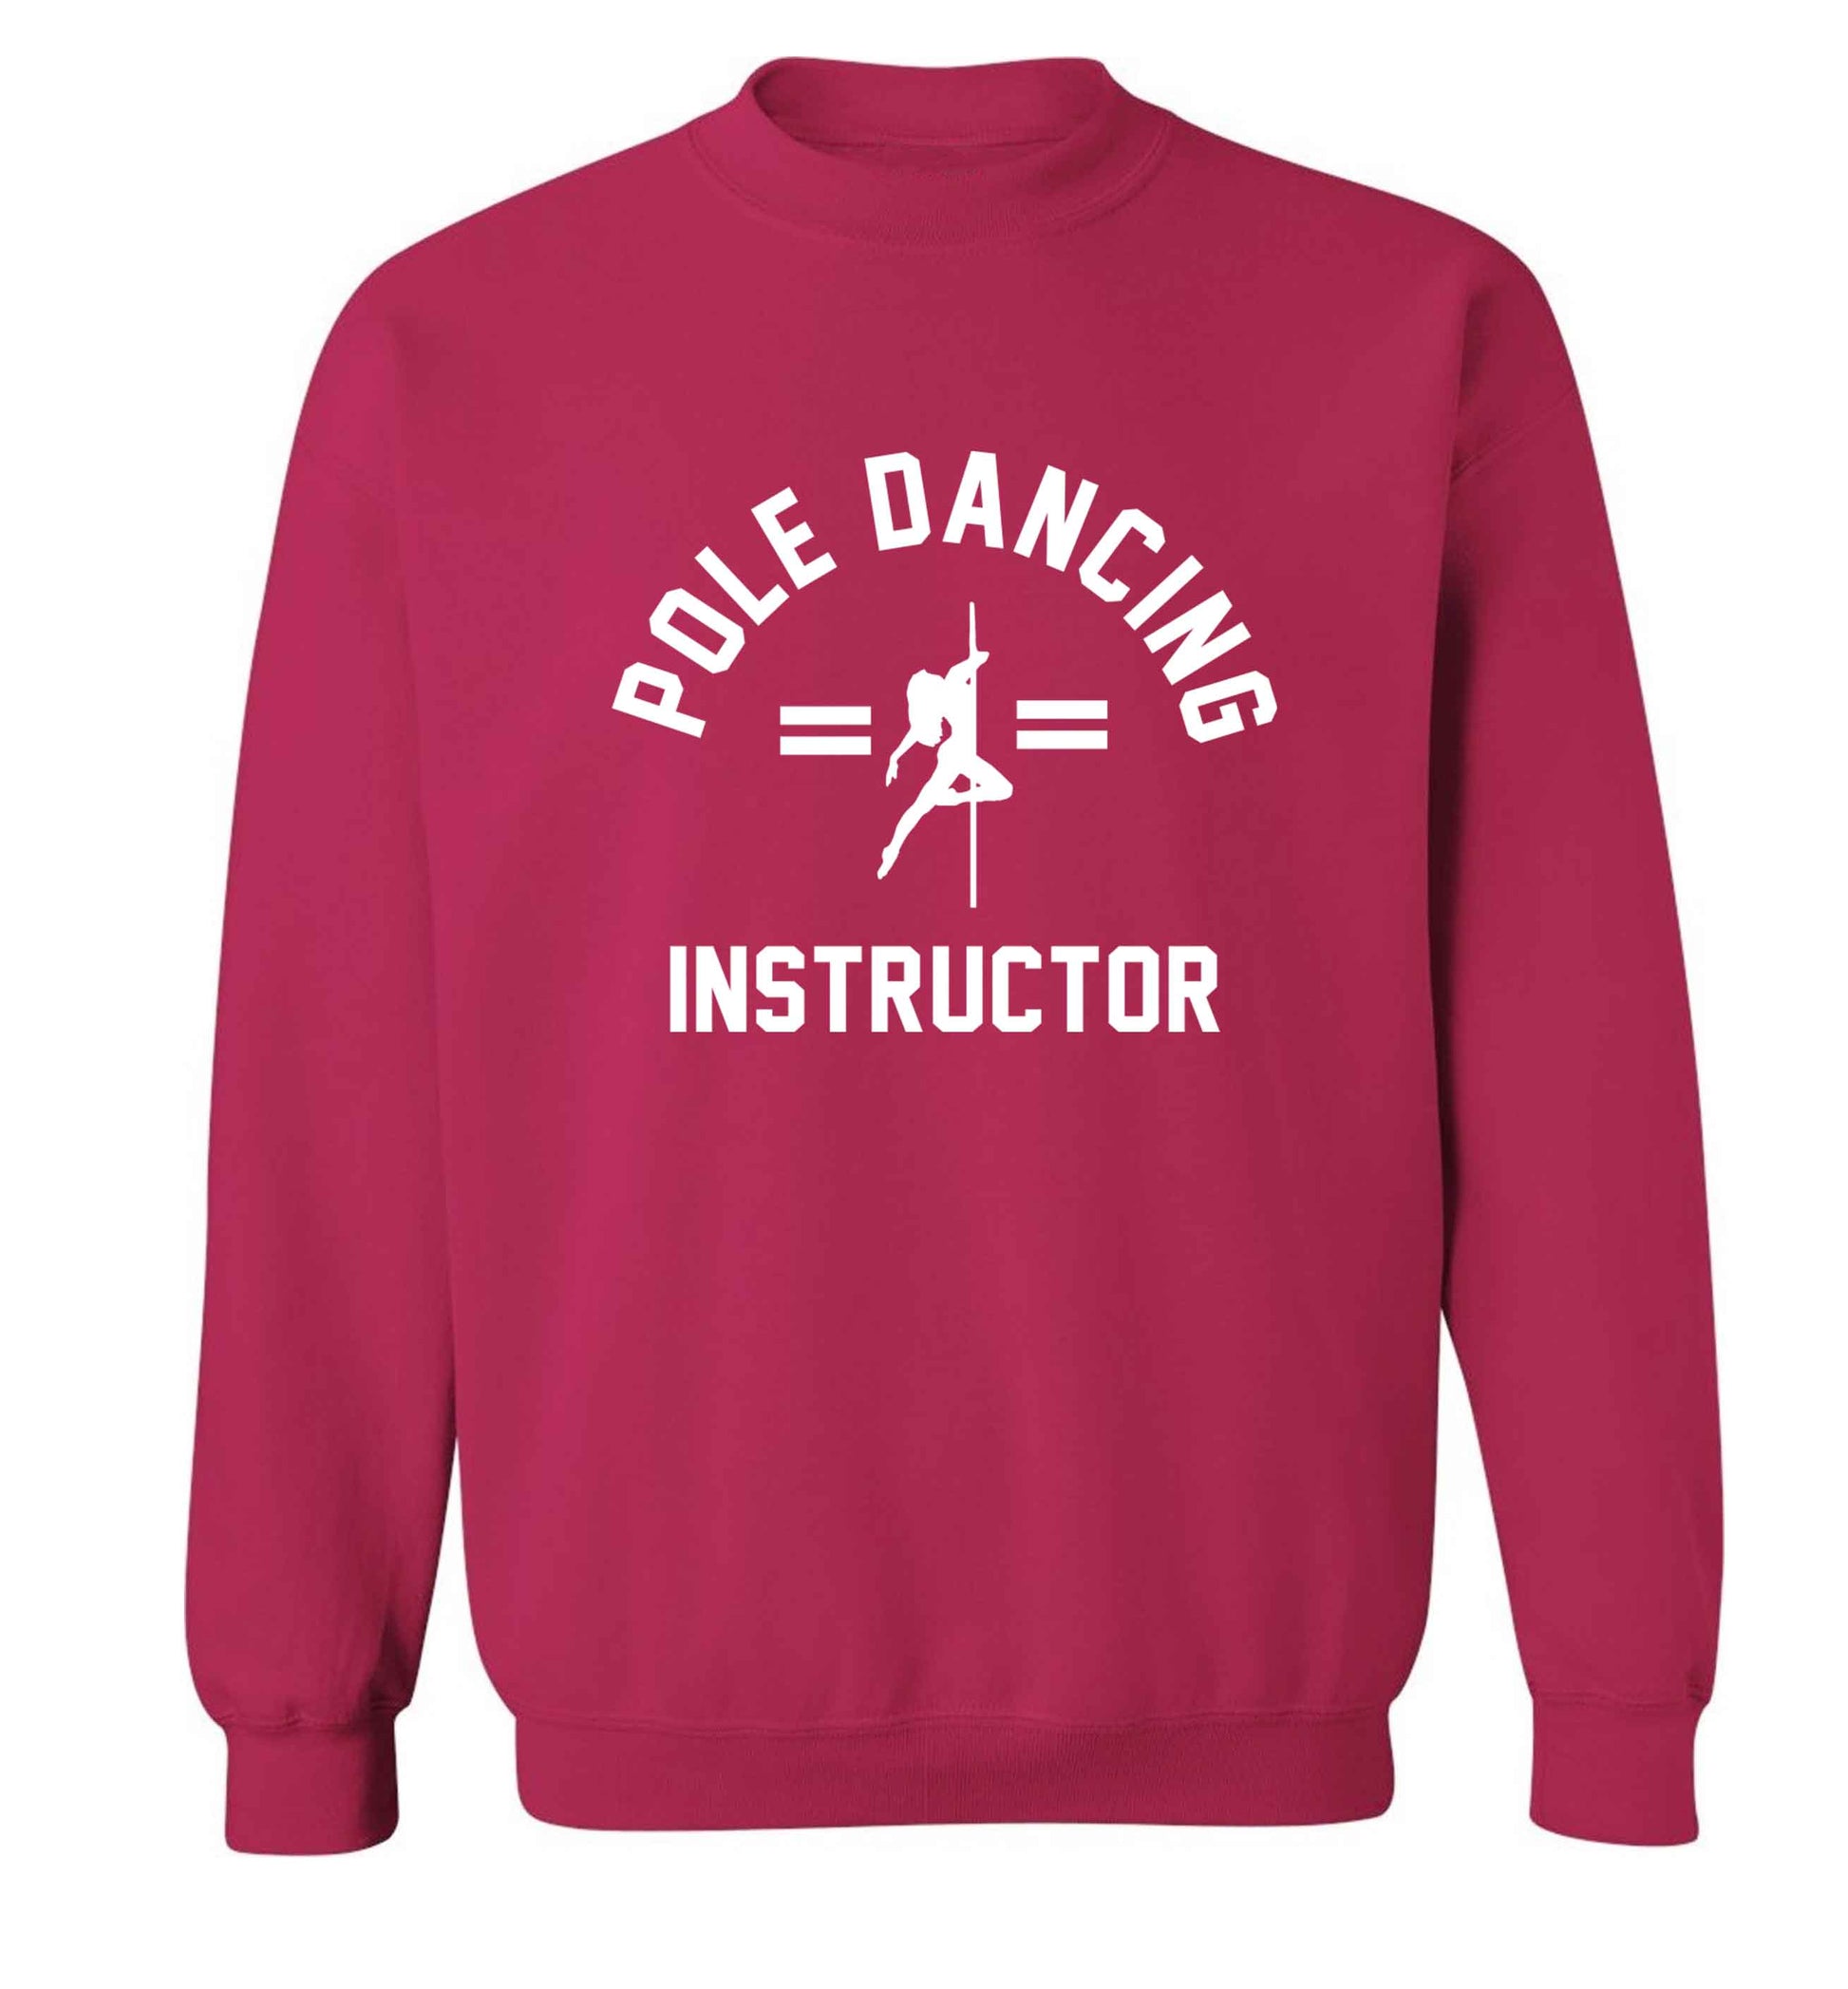 Pole dancing instructor adult's unisex pink sweater 2XL